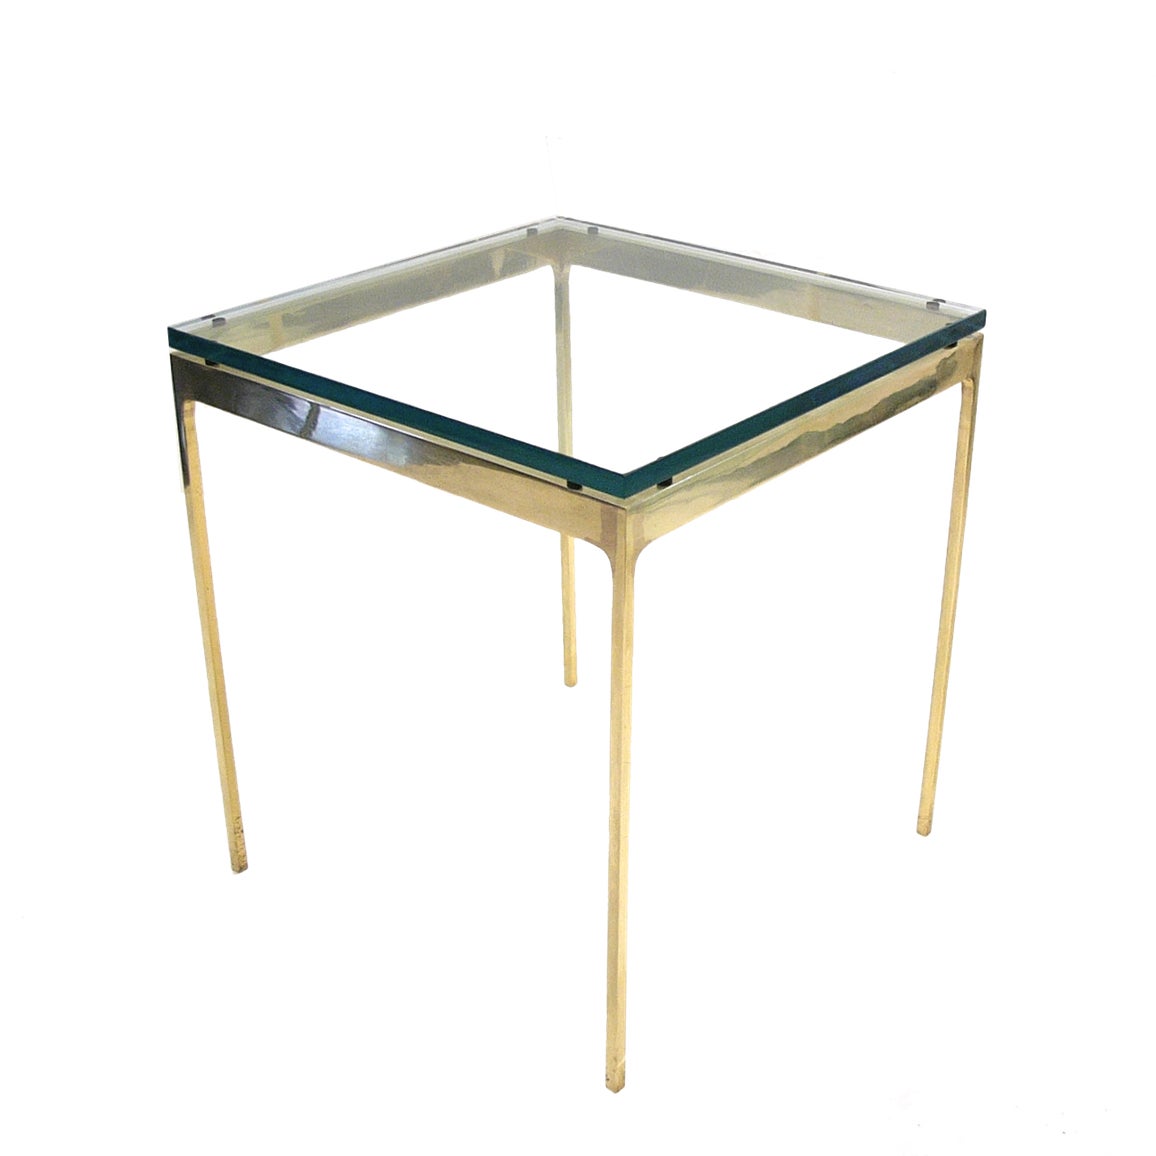 A seamlessly welded brass Nicos Zographos side table from the Thirty-Five series with 3/4 thick glass.